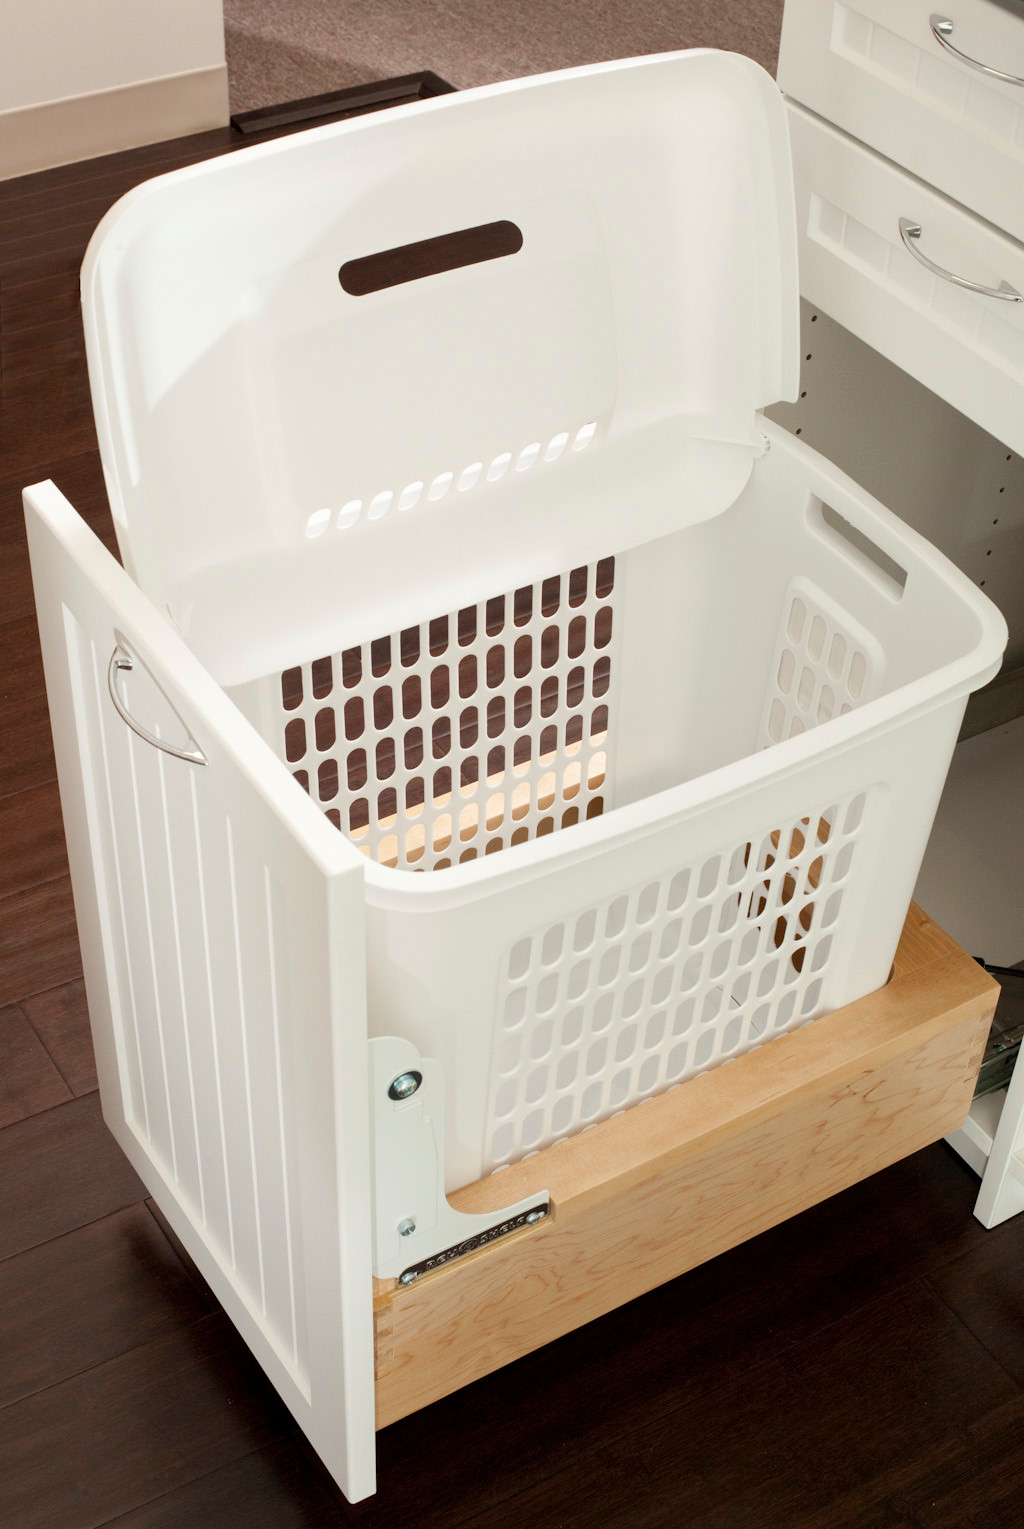 Hastings Home Nylon Laundry Bag in the Laundry Hampers & Baskets department  at